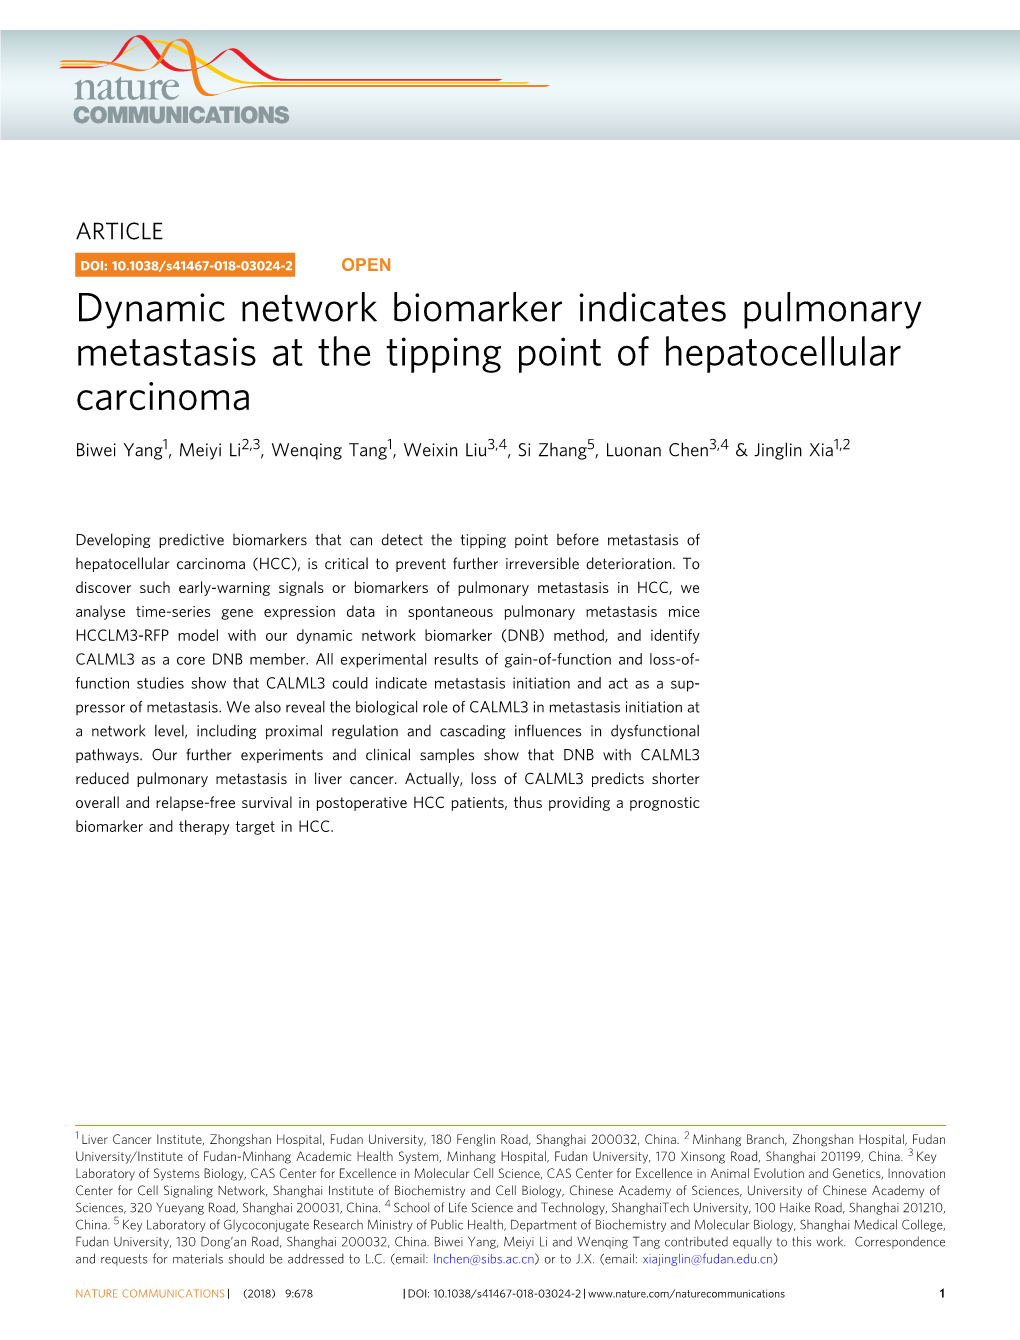 Dynamic Network Biomarker Indicates Pulmonary Metastasis at the Tipping Point of Hepatocellular Carcinoma